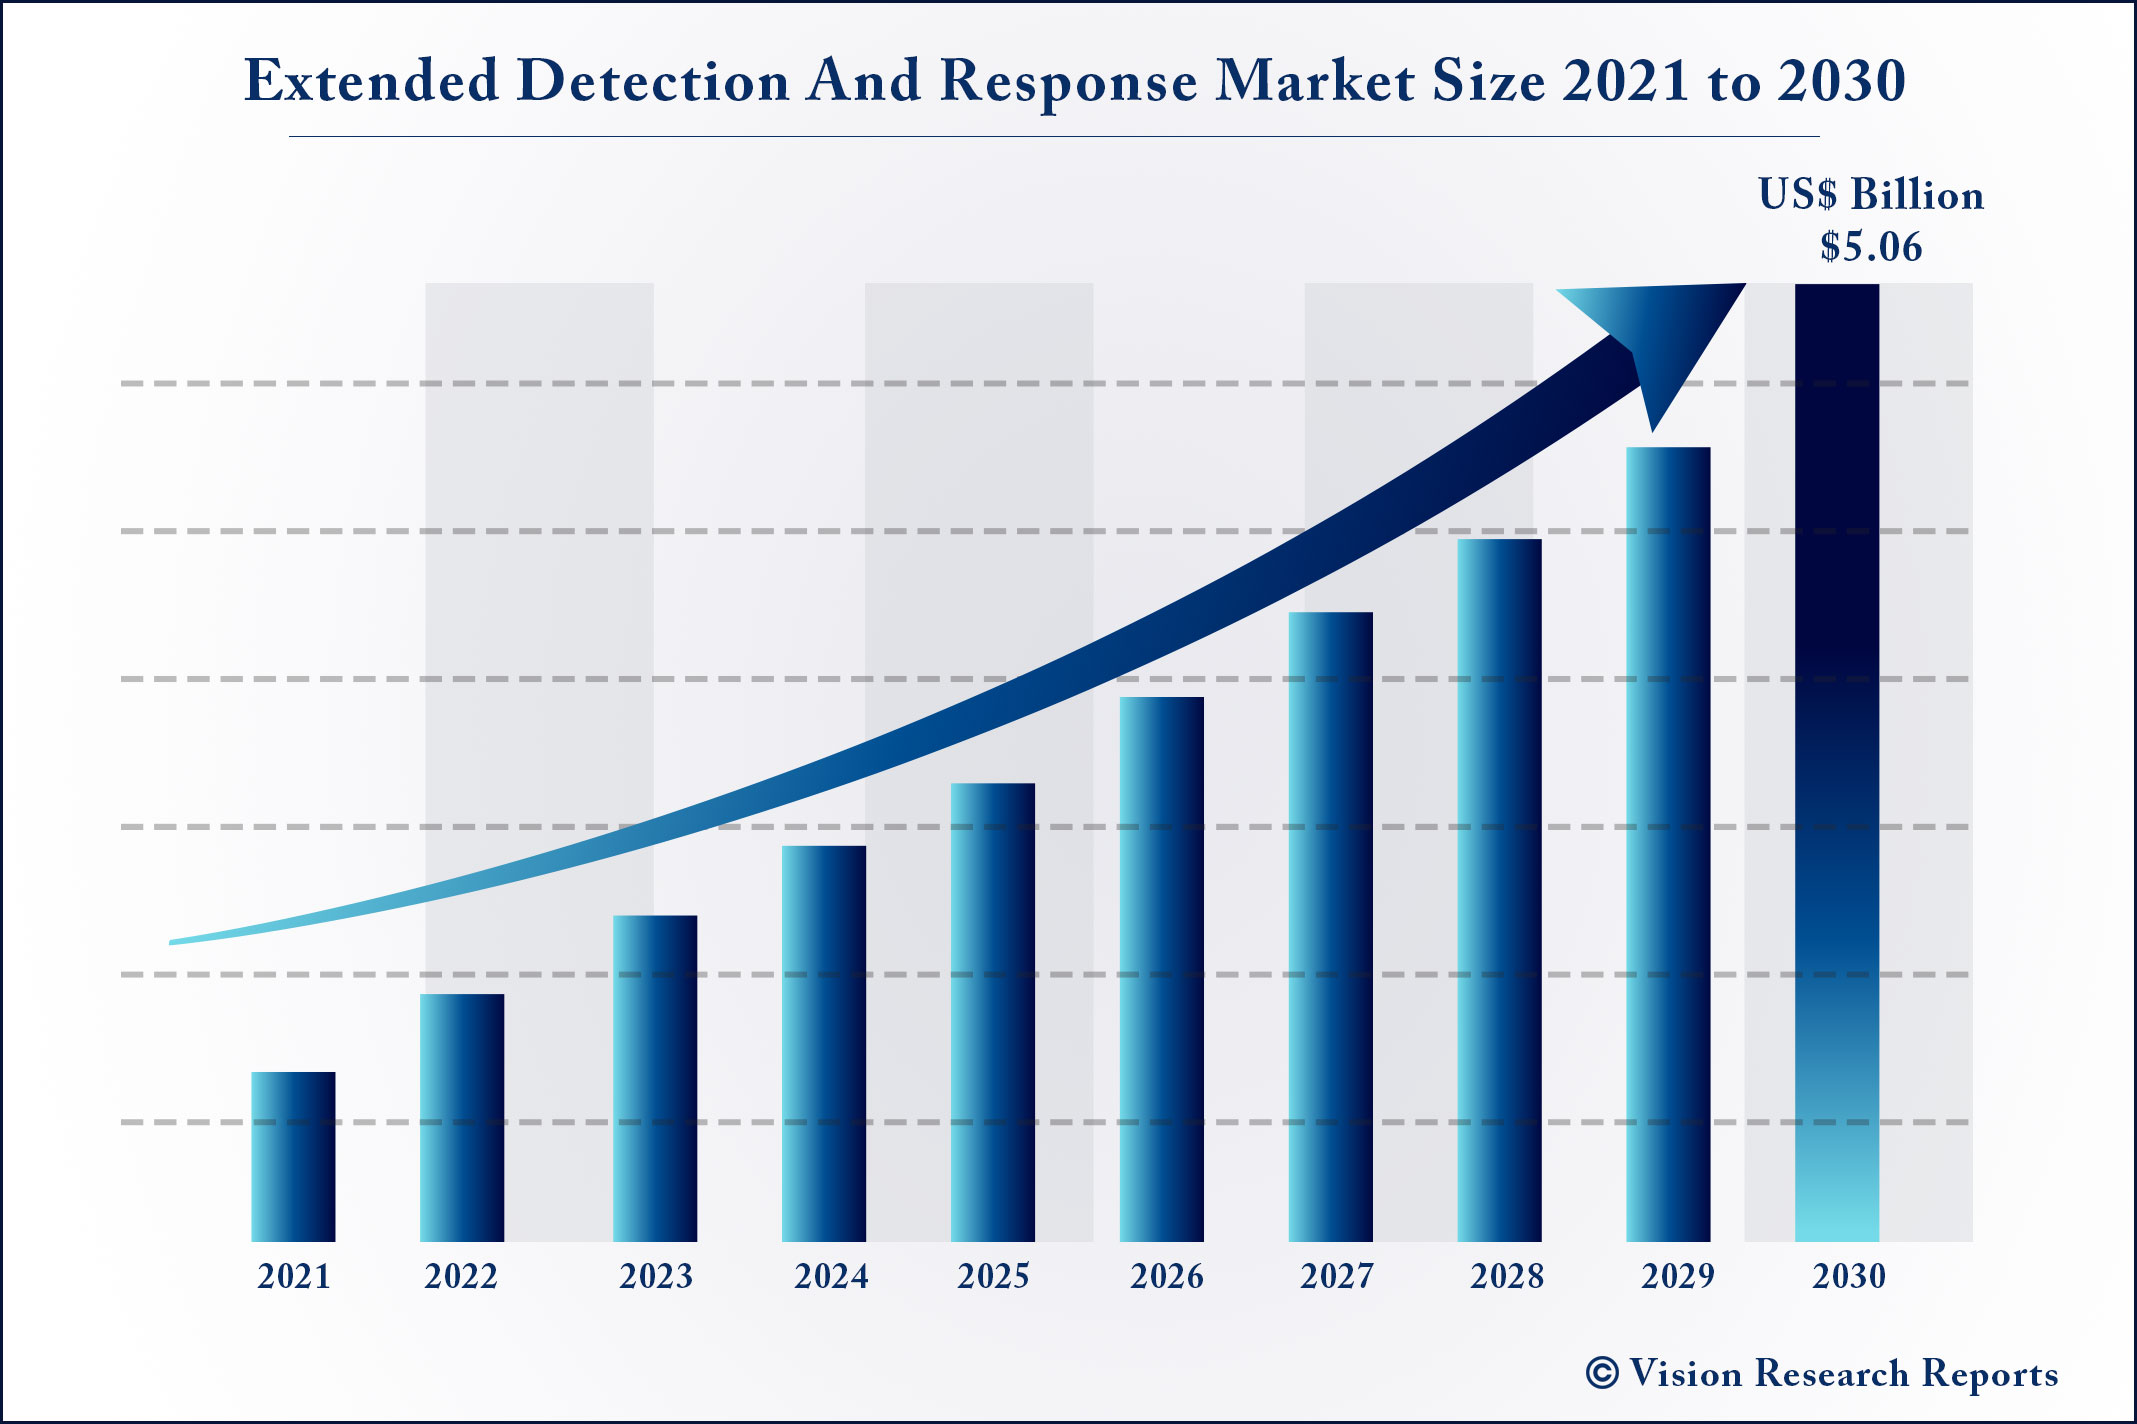 Extended Detection And Response Market Size 2021 to 2030